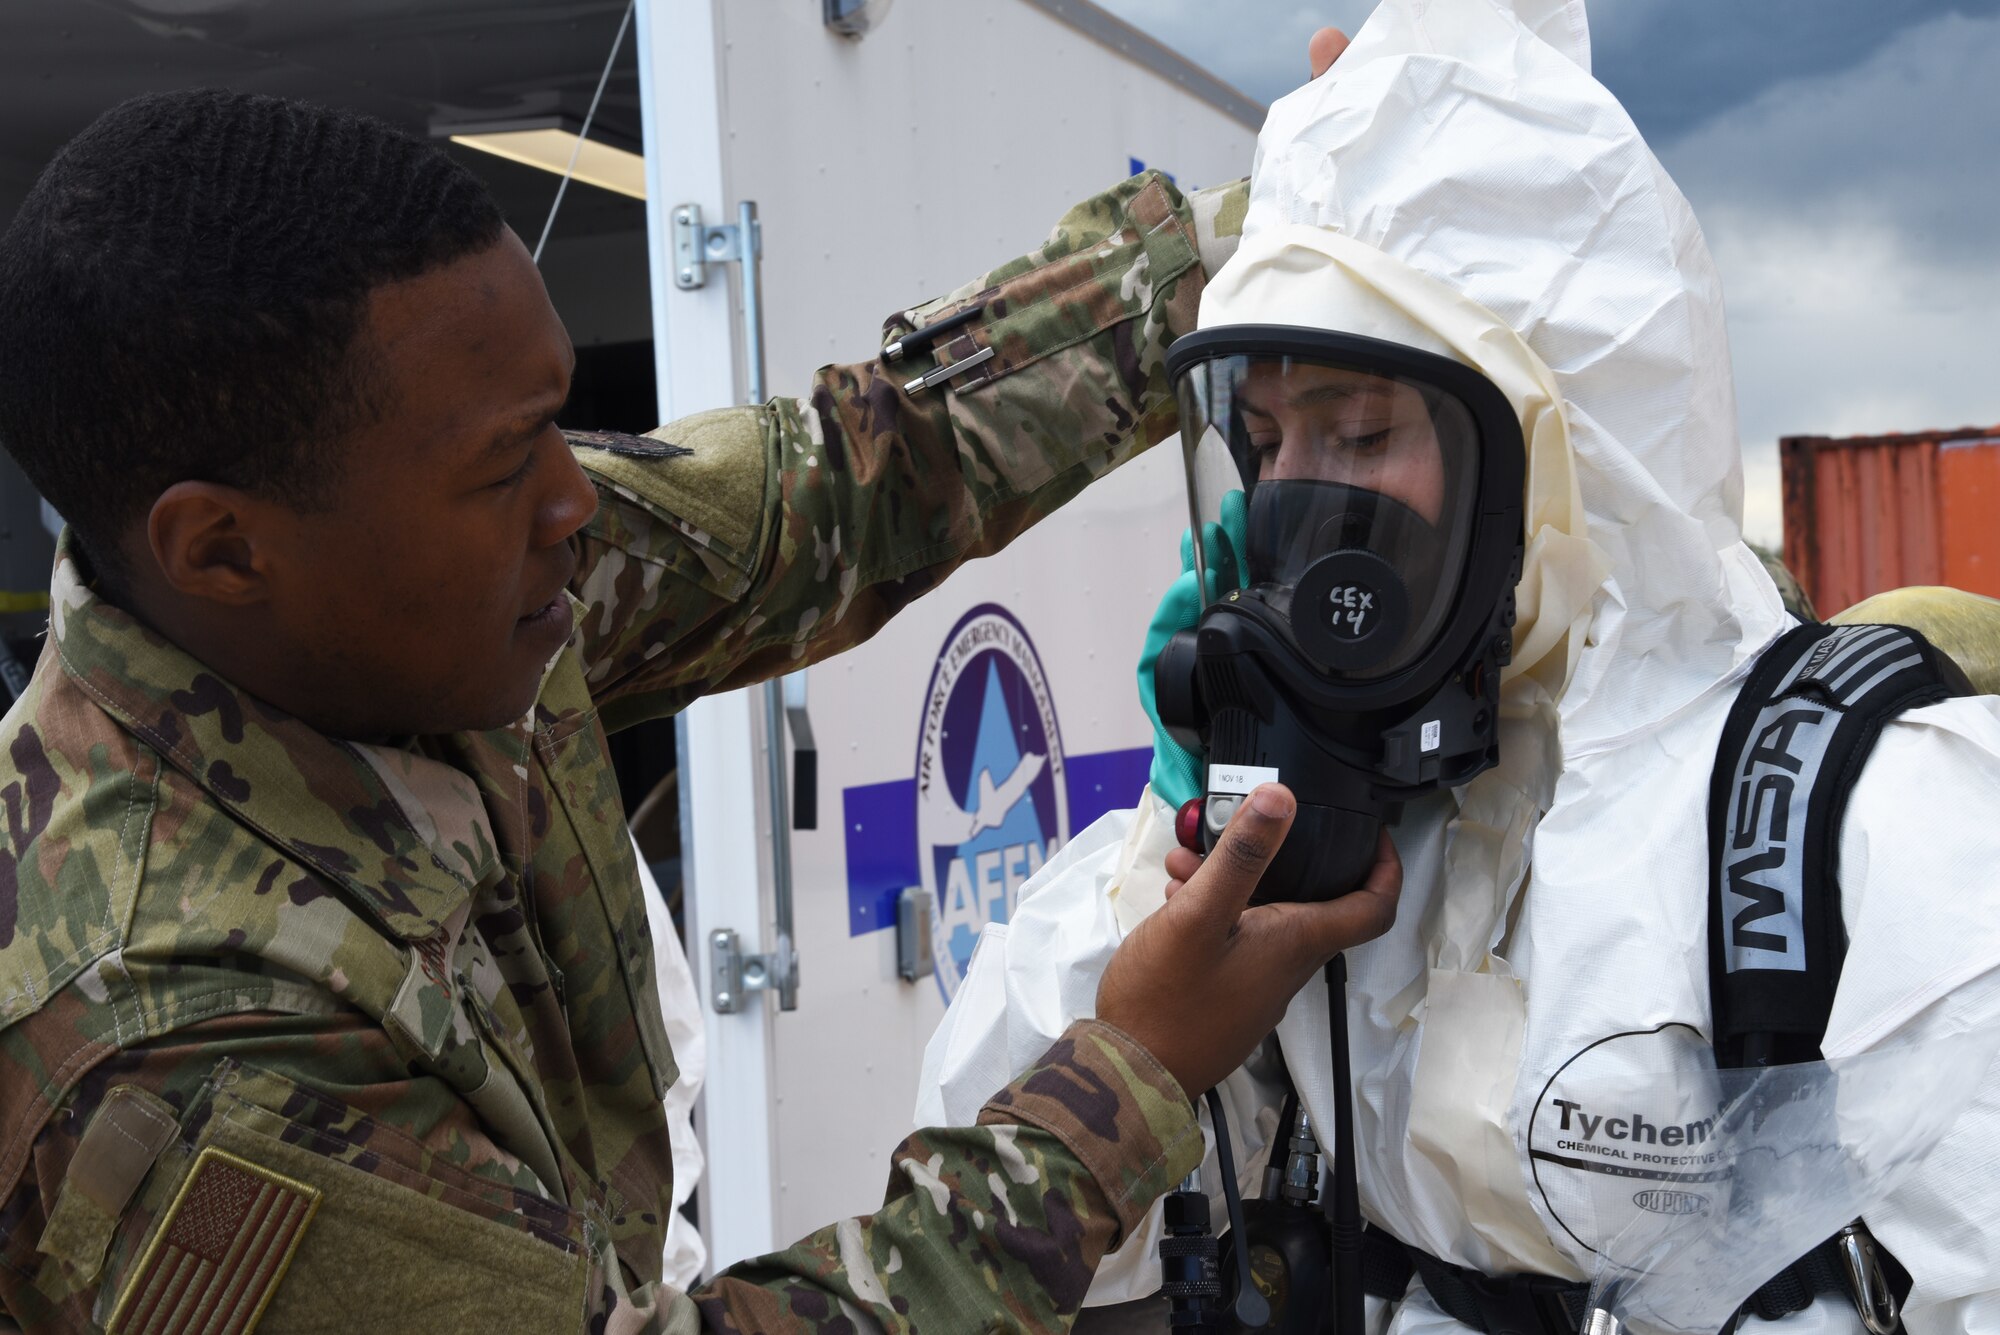 U.S. Air Force Staff Sgt. Aaron Stubbs, 90th Civil Engineer Squadron NCO in charge of emergency management, activates the air supply for Senior Airman Sierra McKenna, 90th CES emergency management technician, during a training exercise at F.E. Warren Air Force Base, Wyoming, June 7, 2019. Emergency management personnel must know how to properly use a self-contained breathing apparatus for real-world scenarios. (U.S. Air Force photo by Senior Airman Breanna Carter)